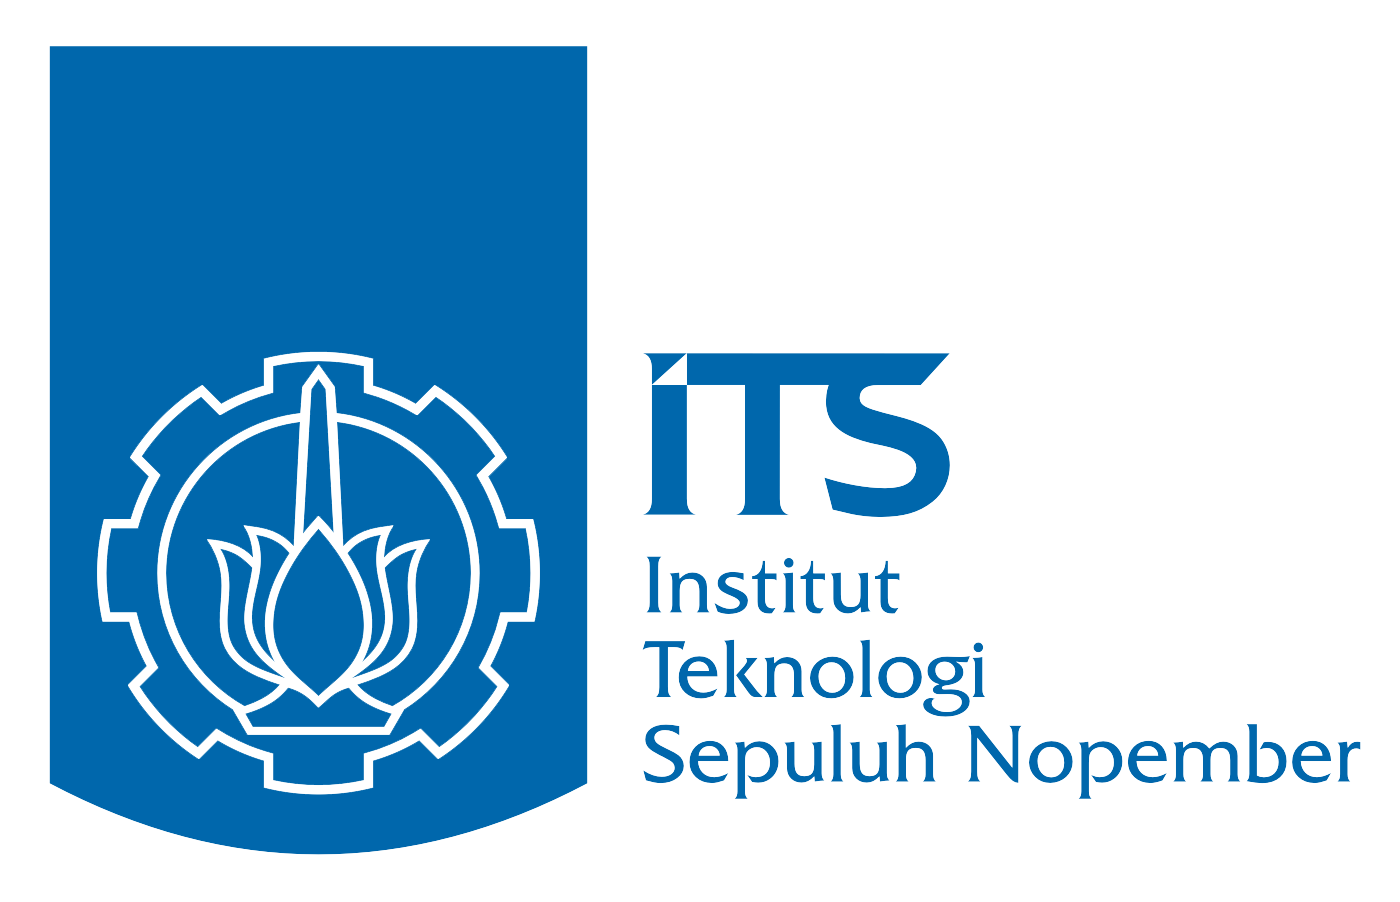 Sepuluh Nopember Institute of Technology (ITS) Indonesia